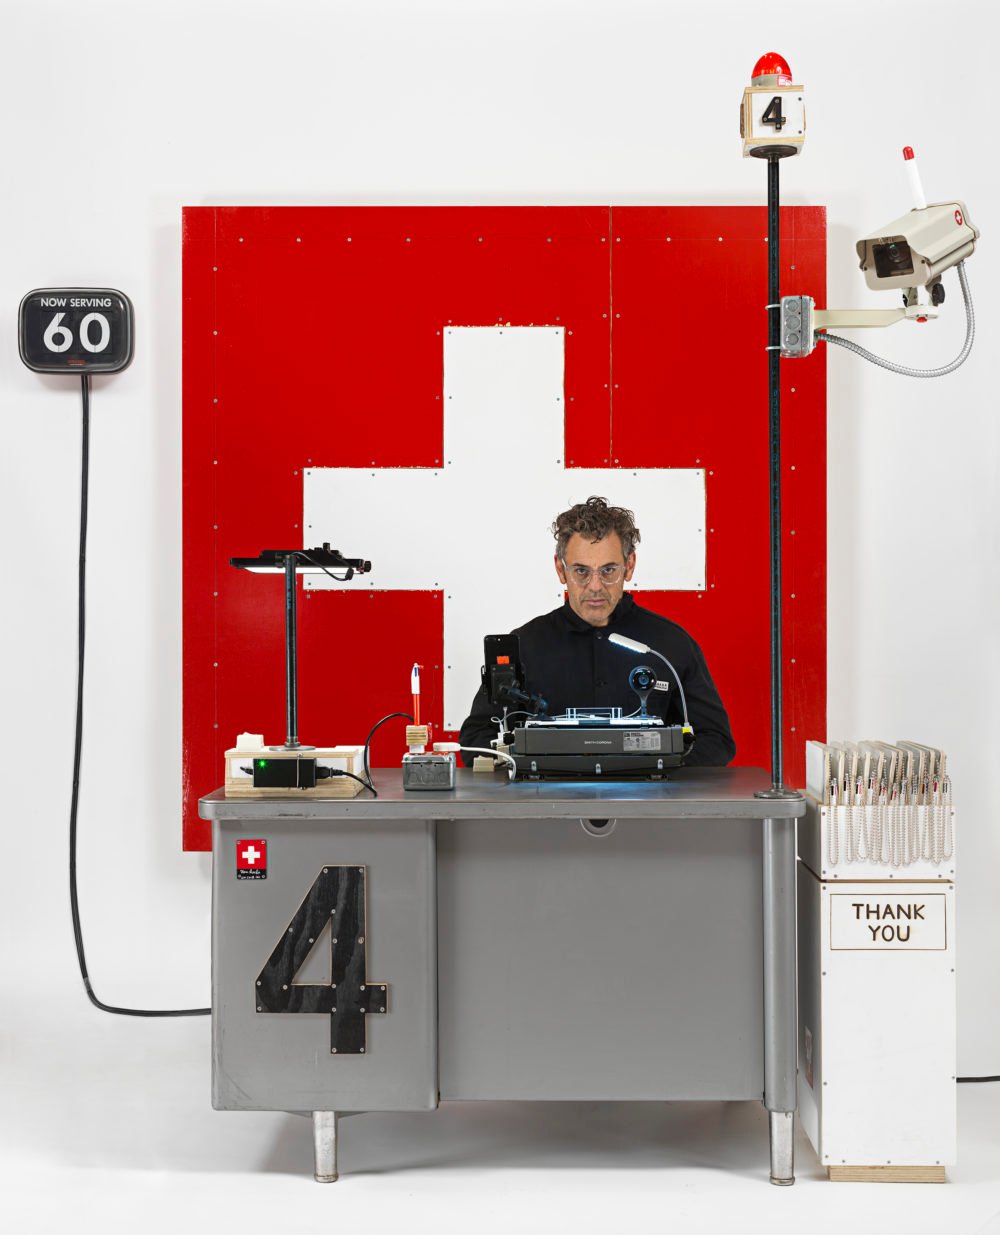 Tom Sachs Designed an Art-Filled Obstacle Course to Deter 'Posers